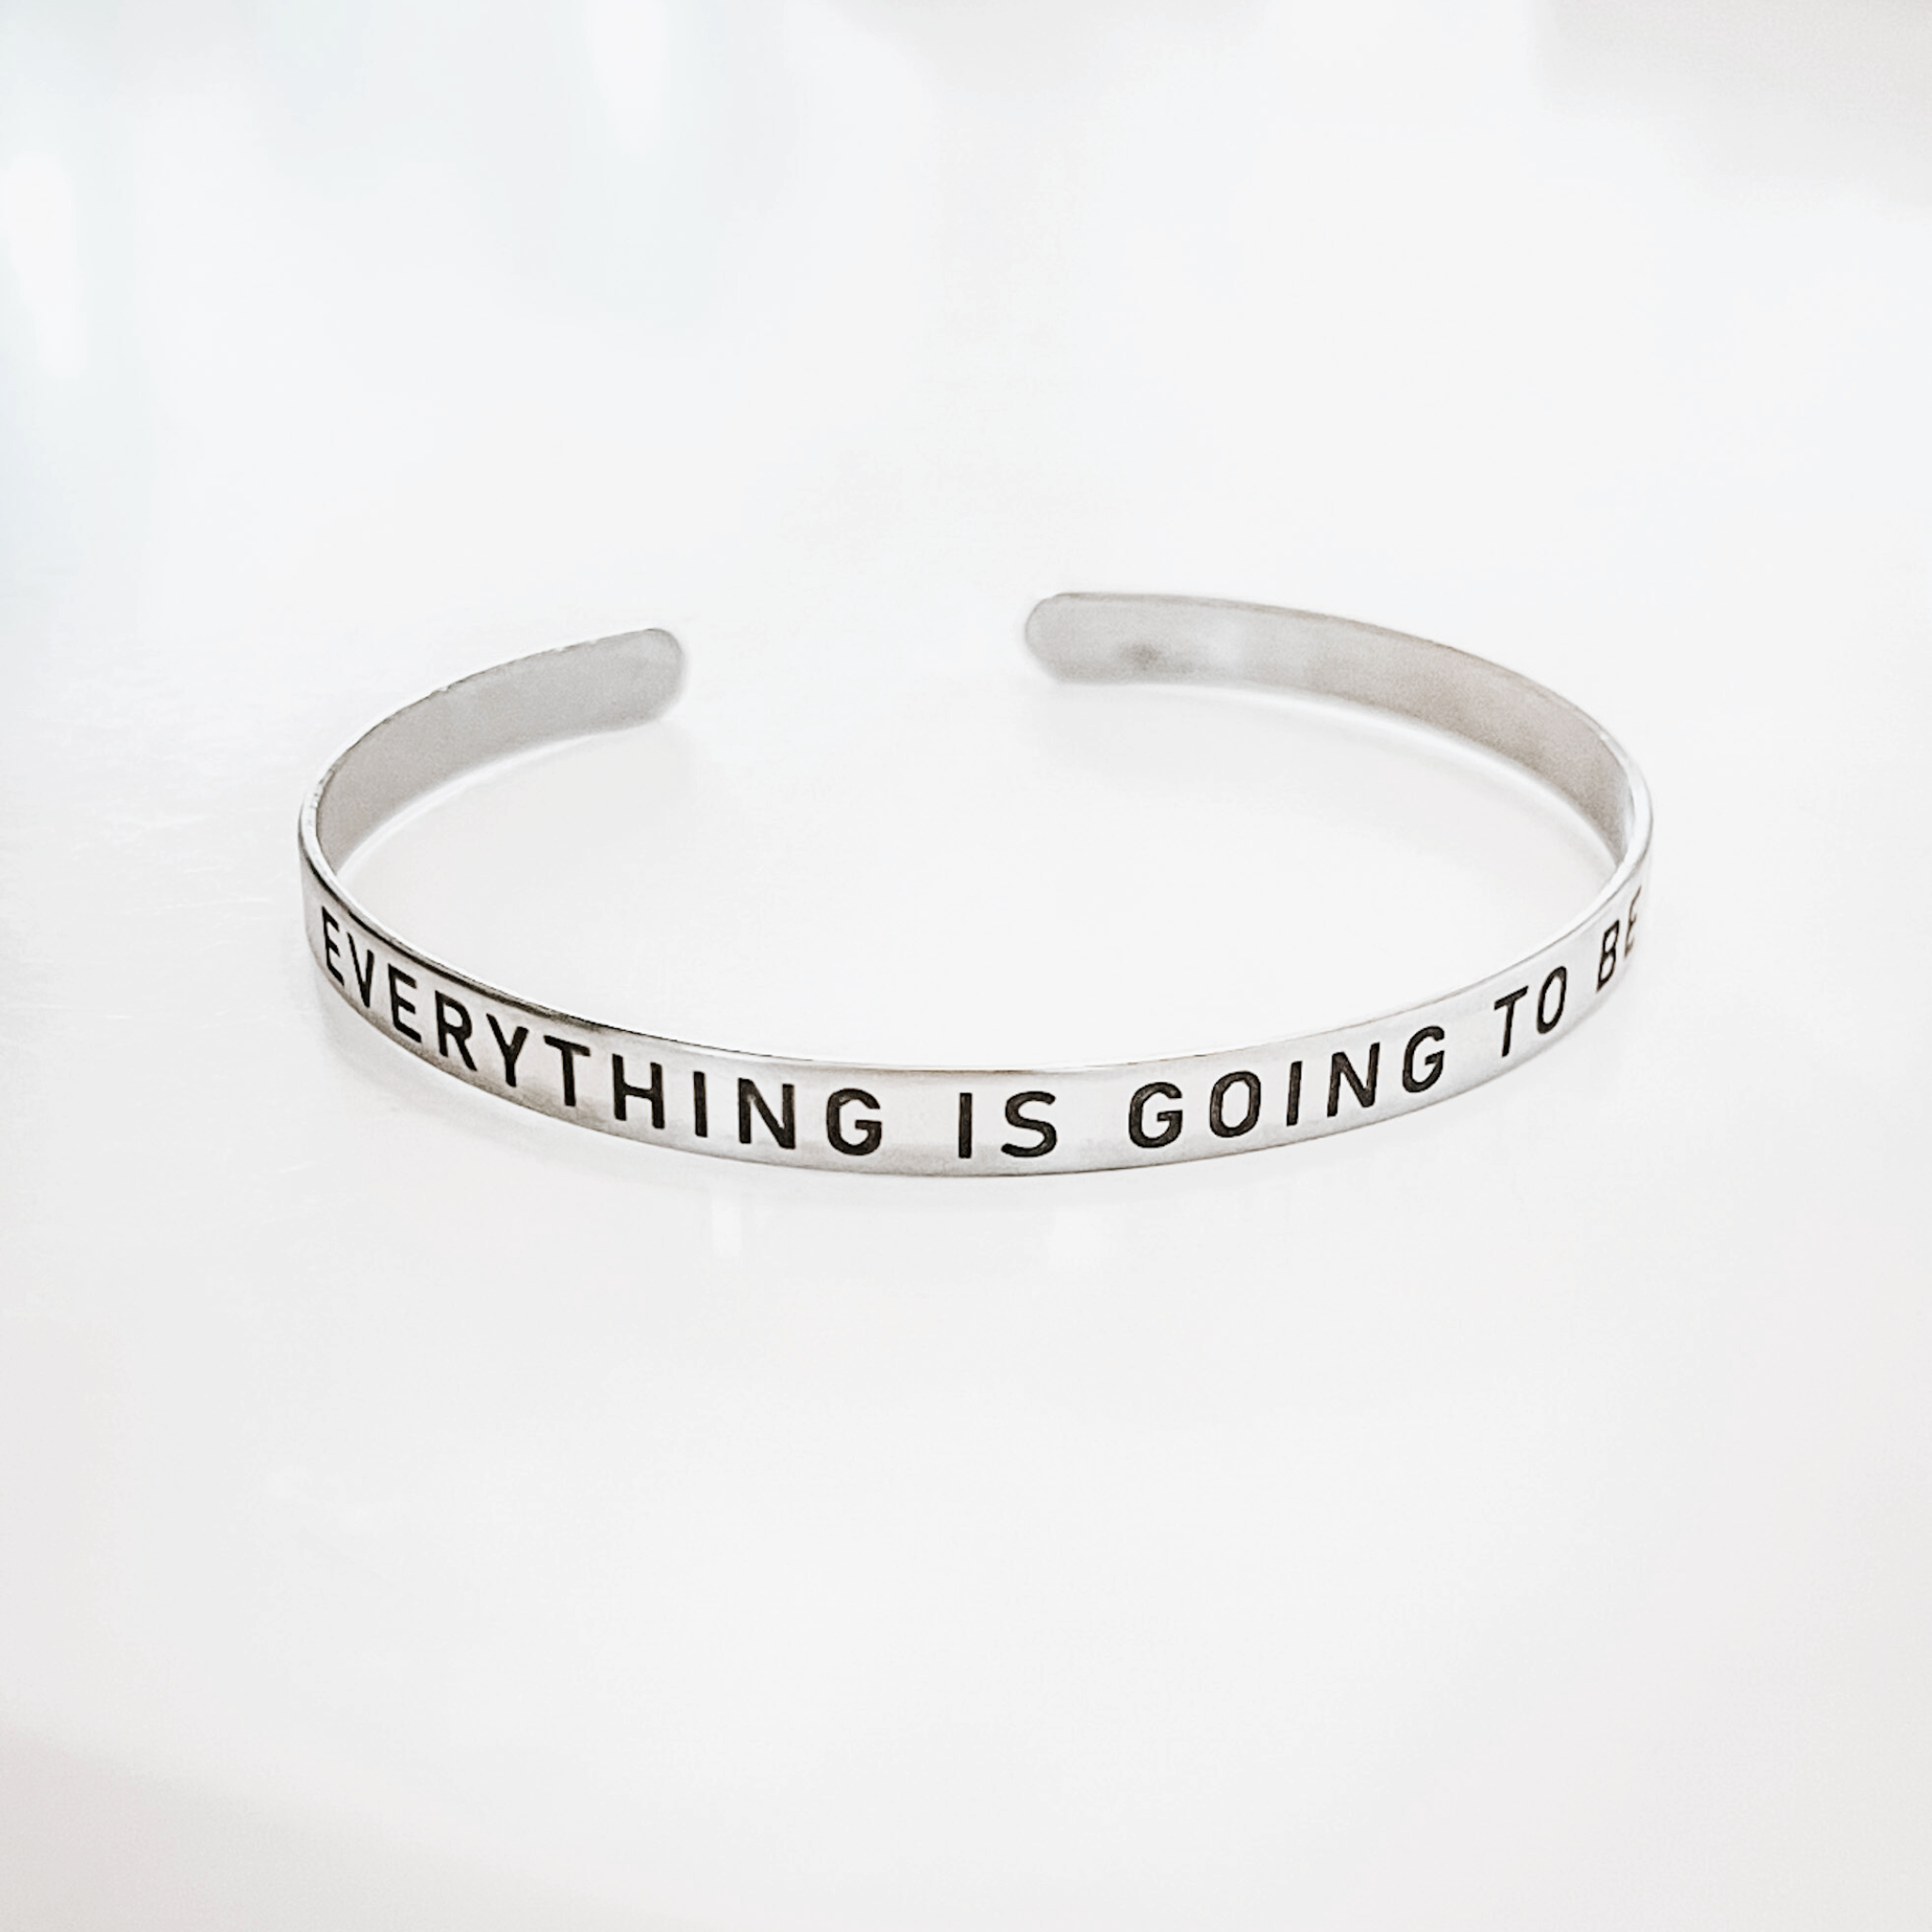 I CAN DO ALL THINGS - Motivational Wristbands